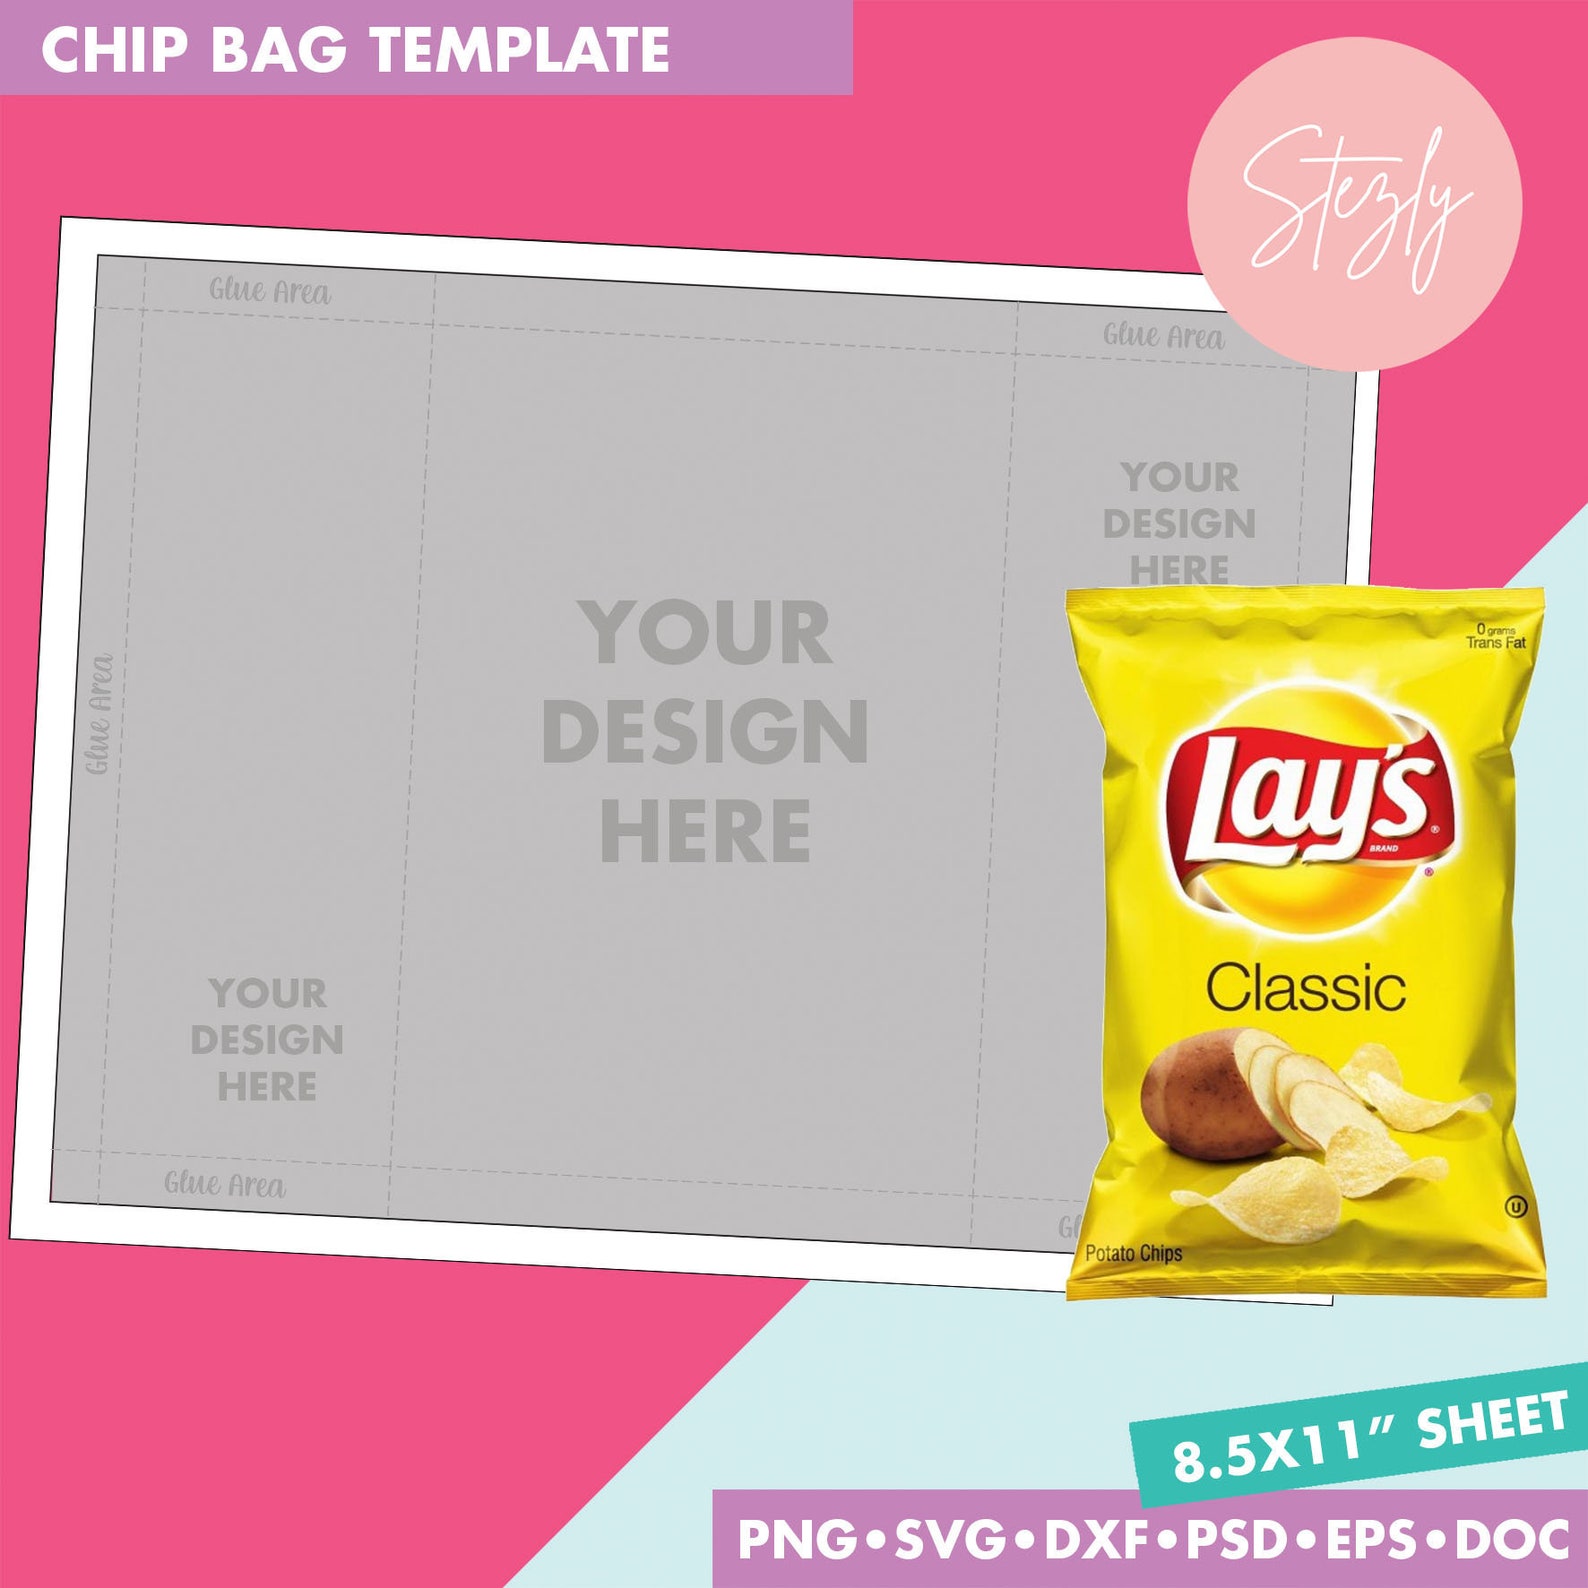 Chip Bag Template Blank Template PSD PNG Microsoft Word | Etsy